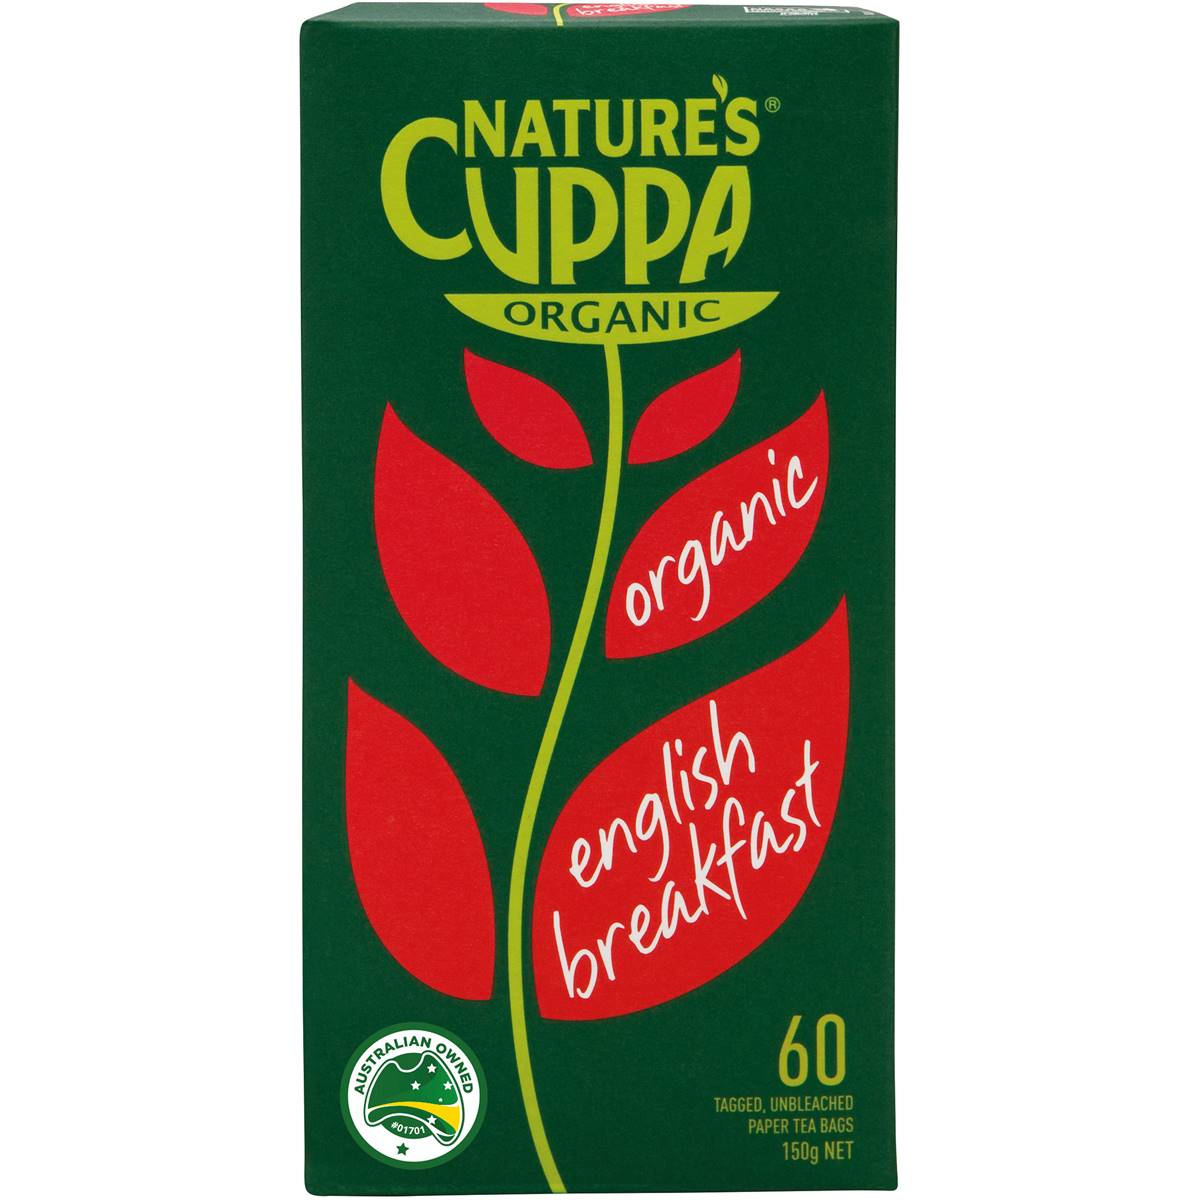 Calories in Nature's Cuppa English Breakfast Tea Bags